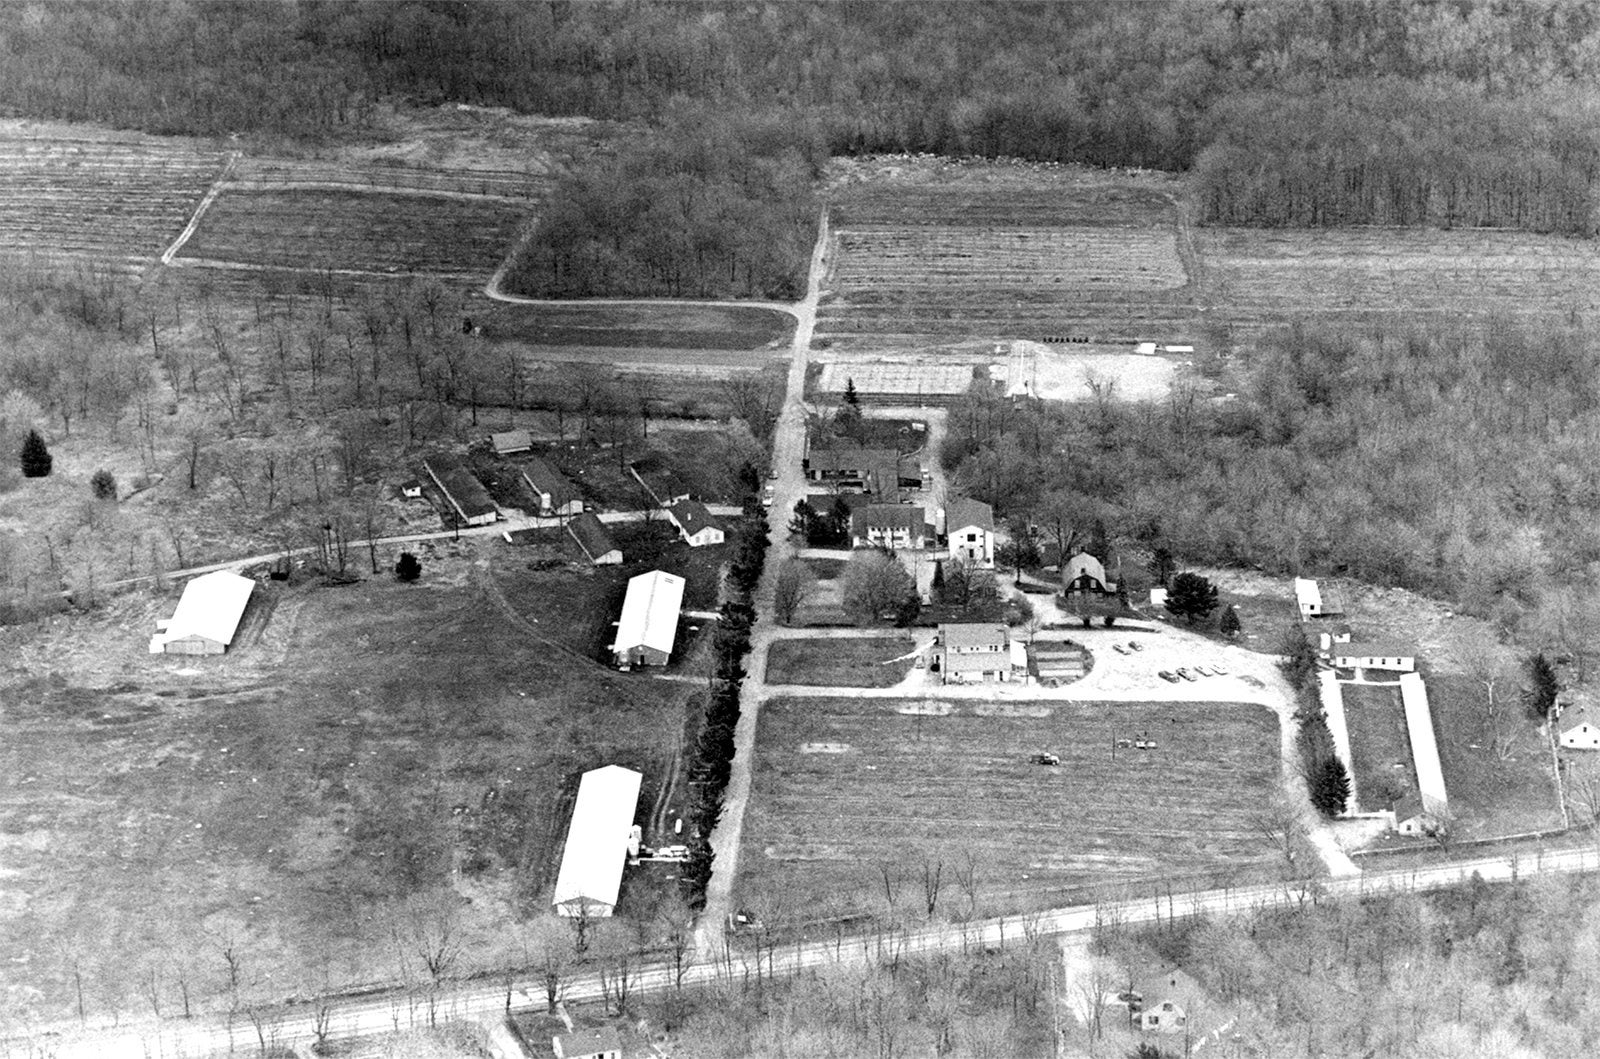 A black and white aerial photo of East Farm from 1965, showing the buildings and the cars an farming trucks of the era